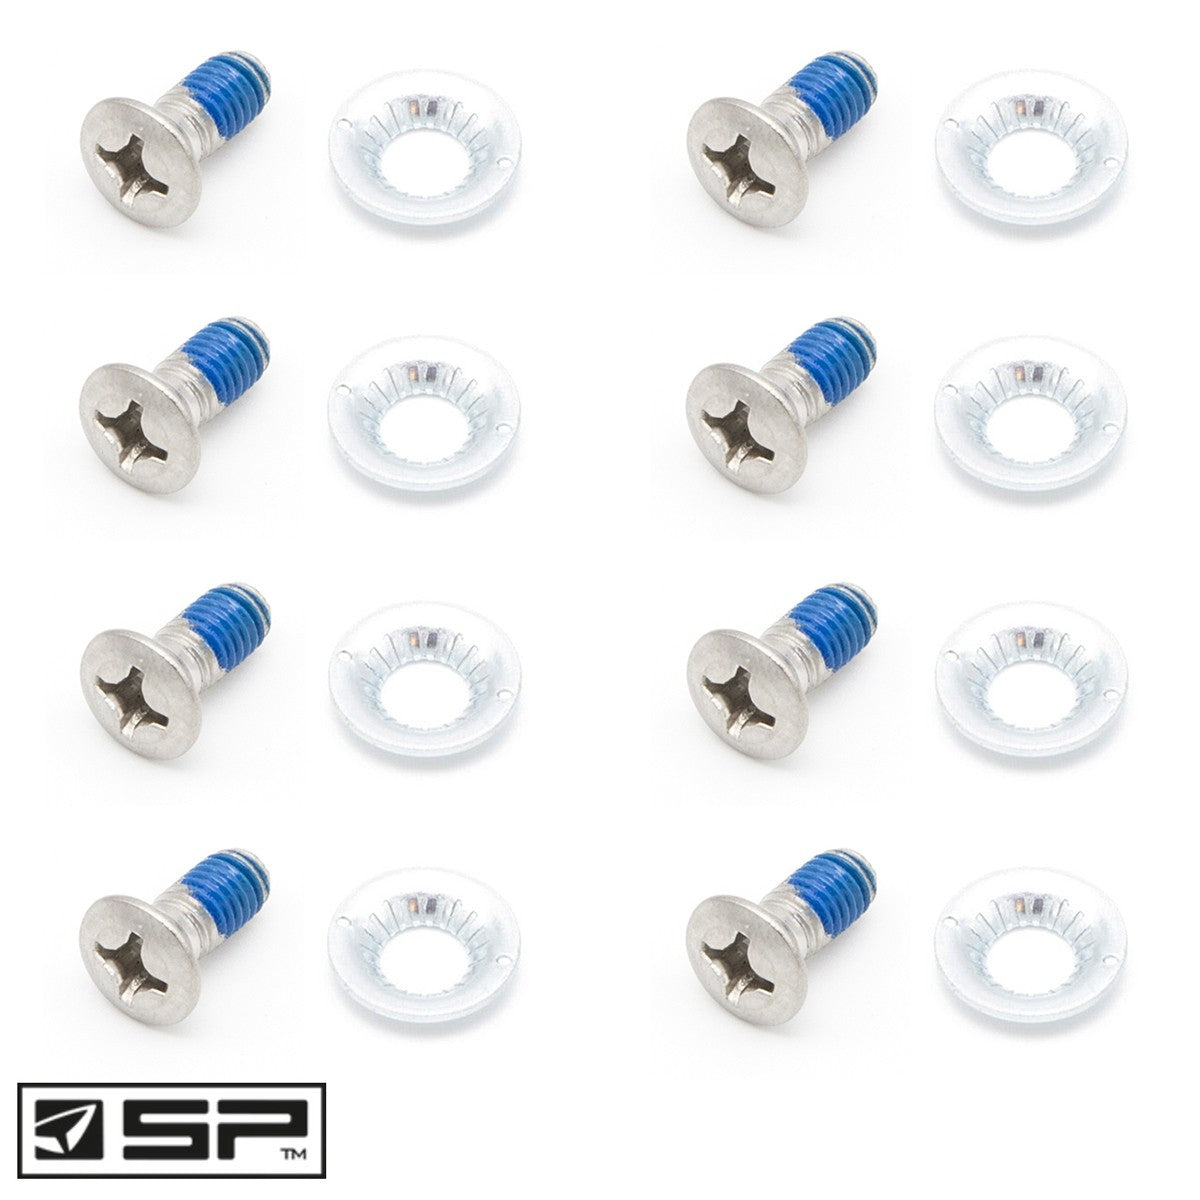 SP - Mounting Pack - 8x 16MM Screws / Washers for Snowboard Mounting